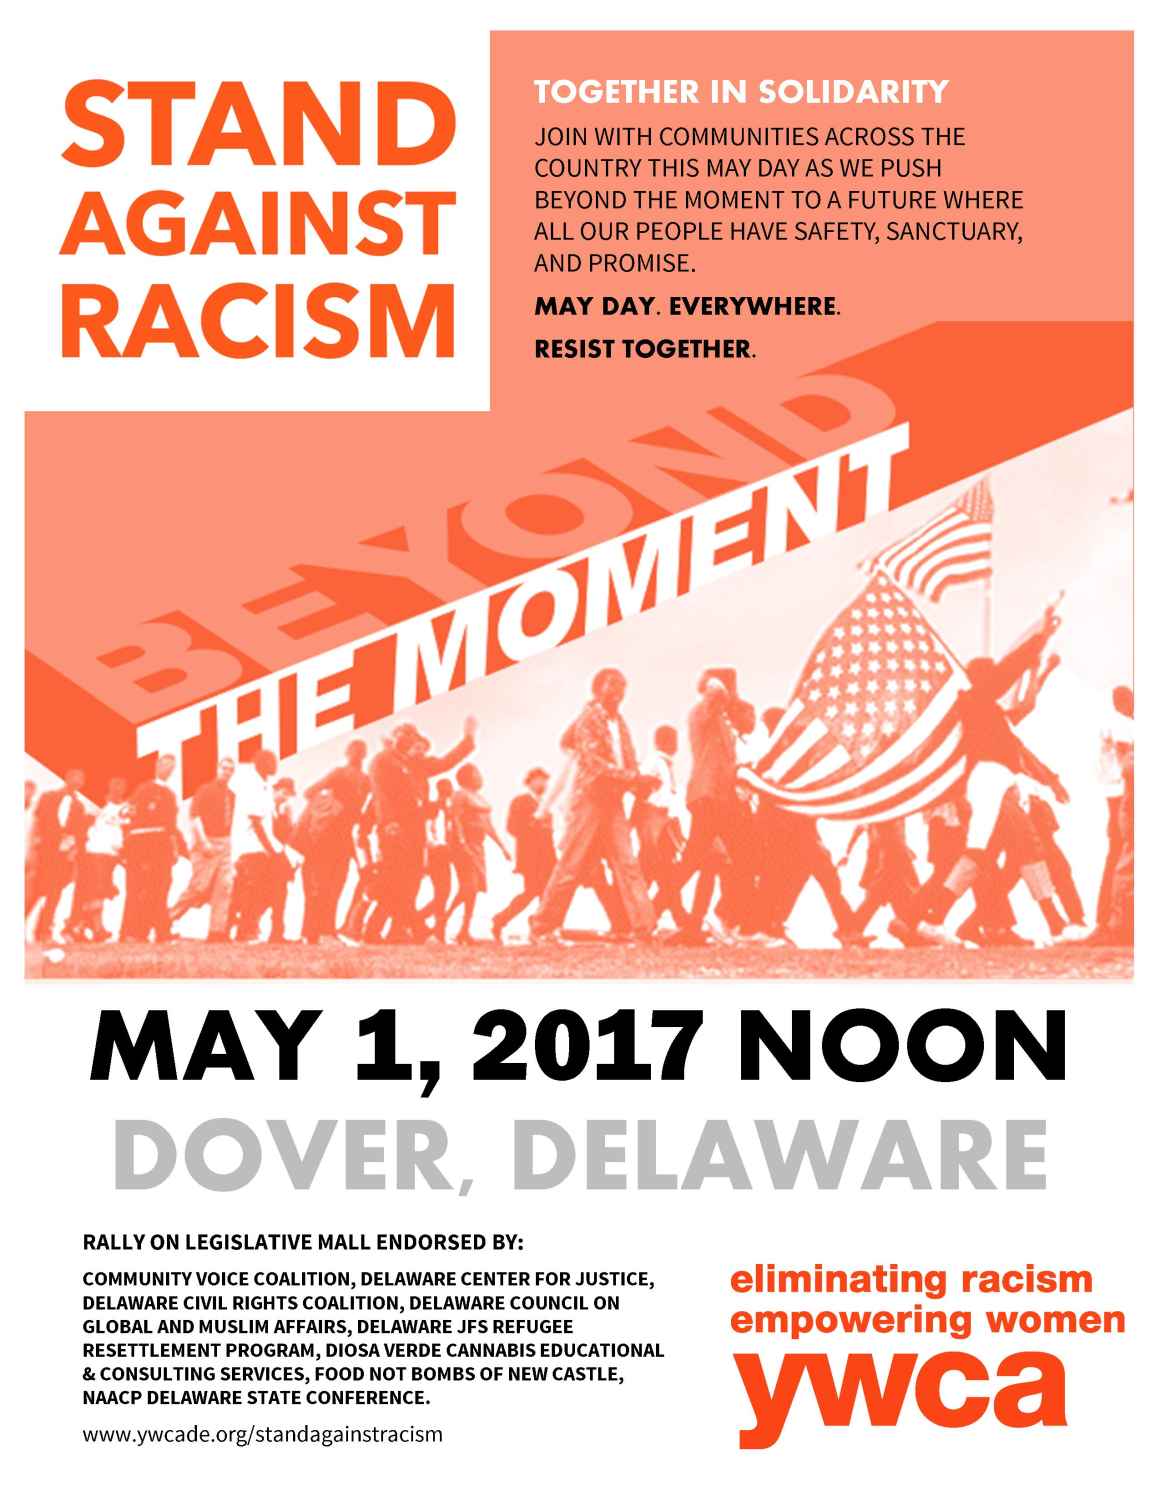 Stand Against Racism Rally